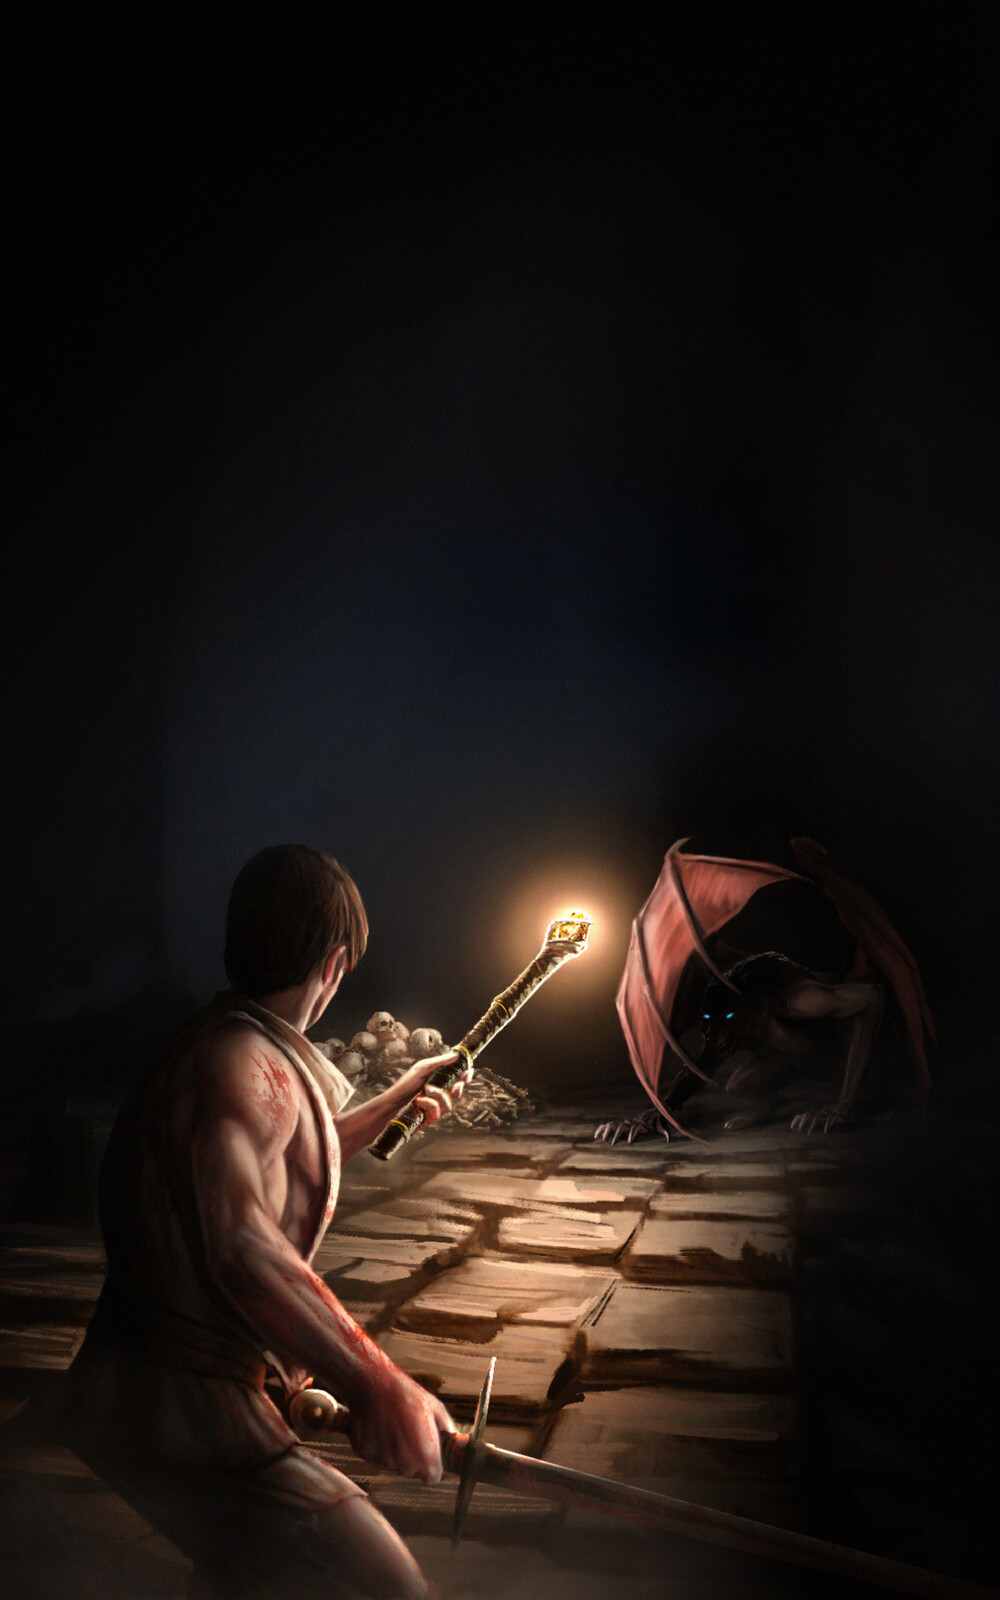 Book Cover illustration
"The Scepter of Amon"
Available on Amazon books